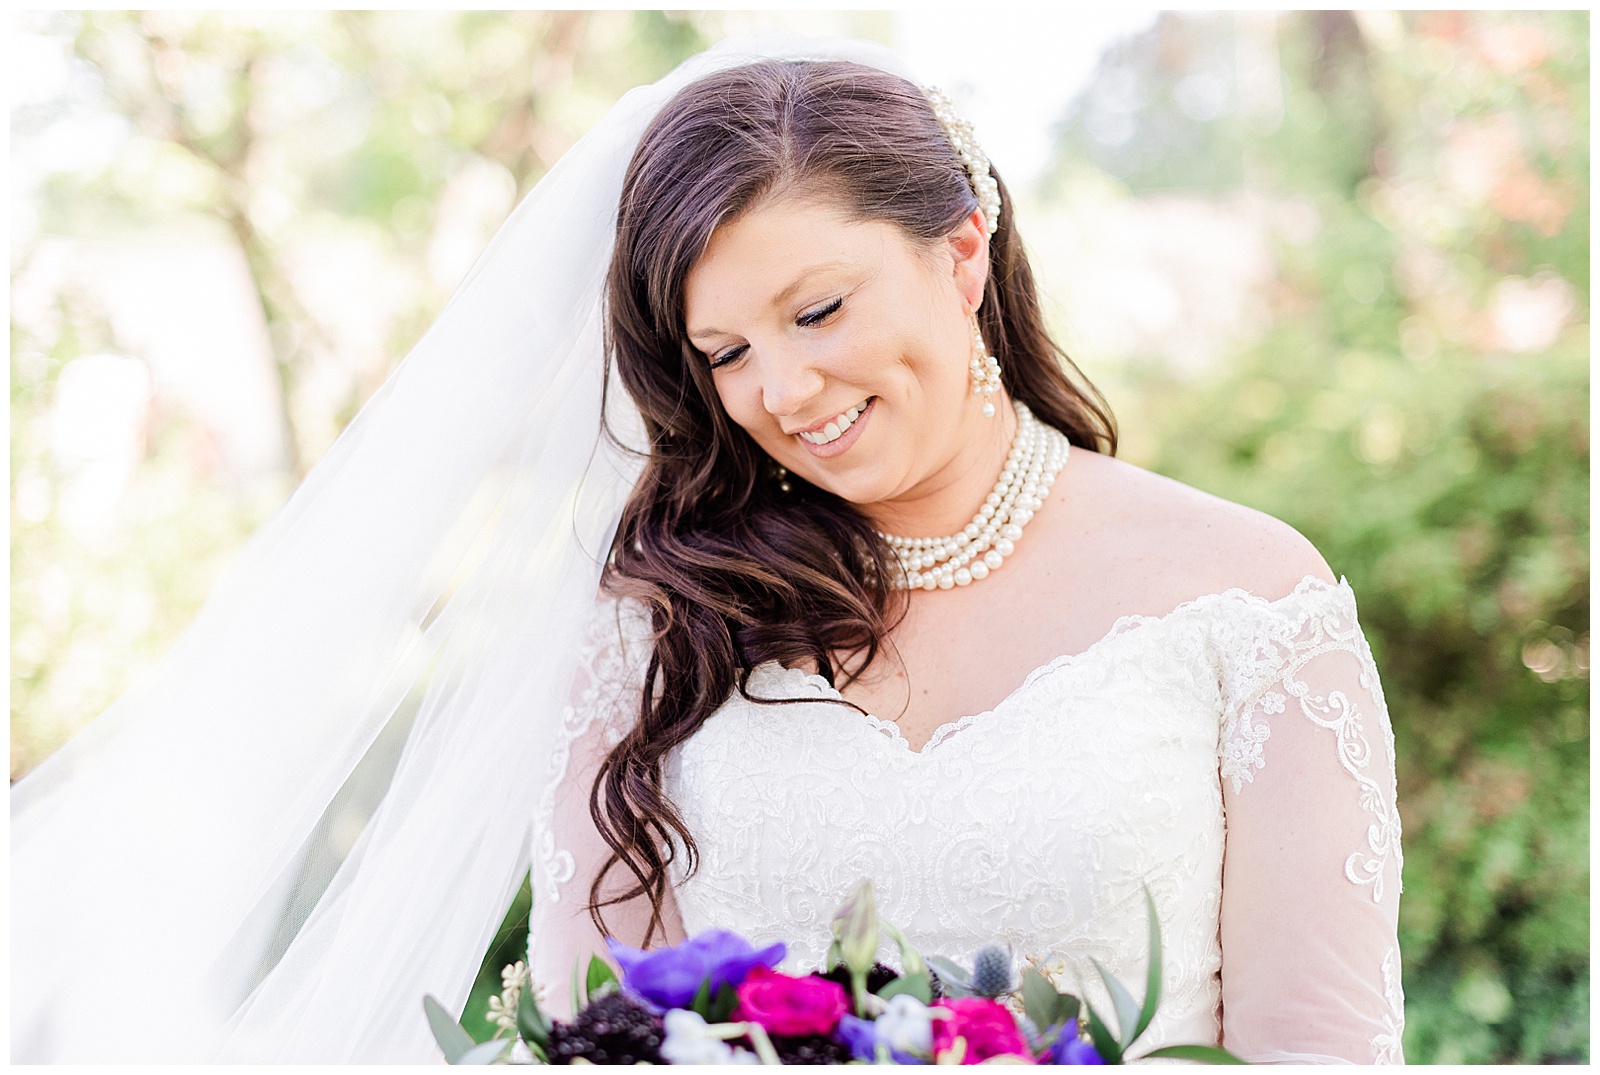 💍 bridal and detail shot of bride with colorful pink and purple bouquet in wedding portrait photo with lace wedding dress with rhinestone belt rhinestone barrette in hair down with pearls 💍 Bright Colorful Summer City Wedding in Charlotte, NC with Taryn and Ryan | Kevyn Dixon Photography